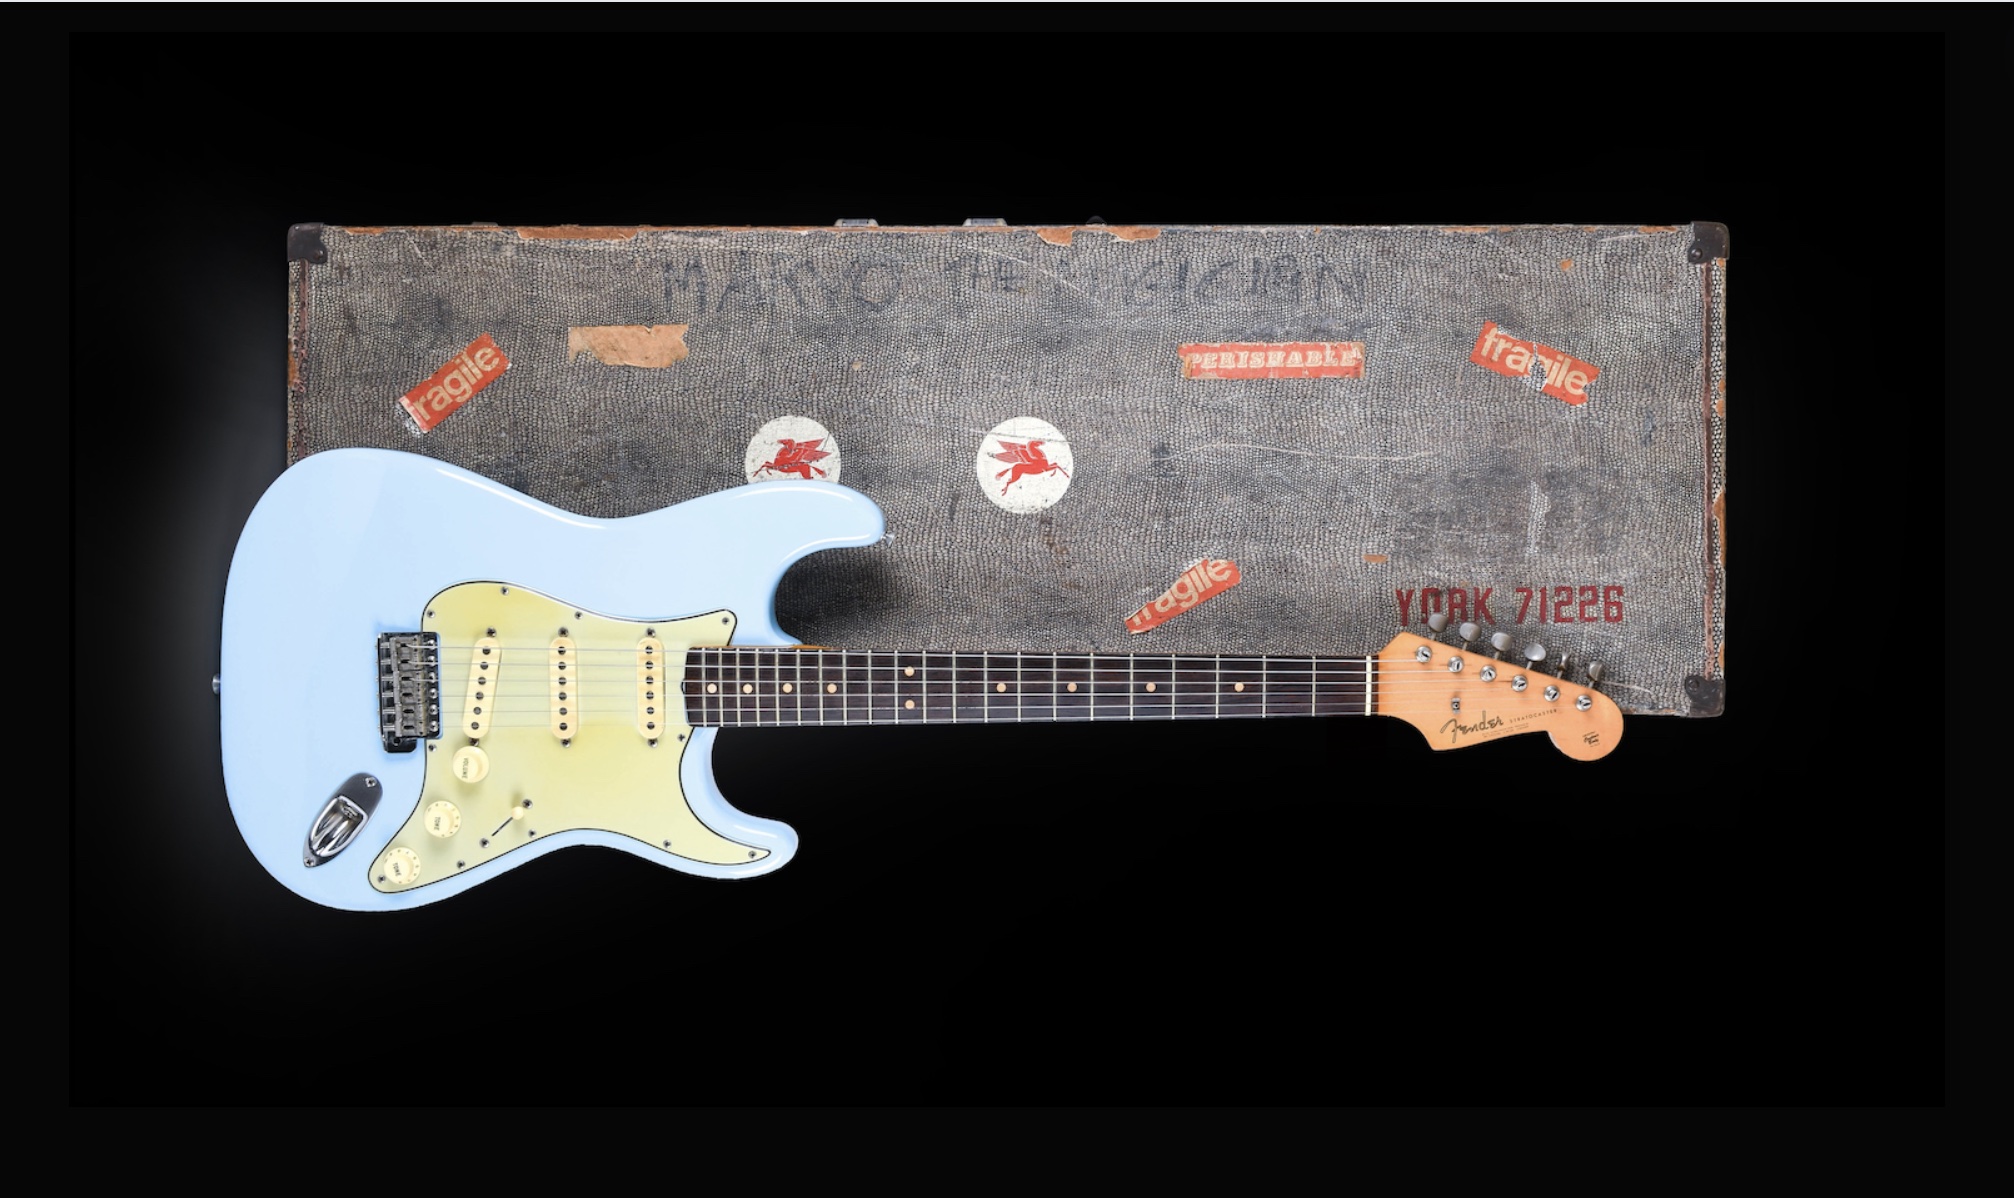 1963 Fender Stratocaster set to strike a chord – Antique Collecting